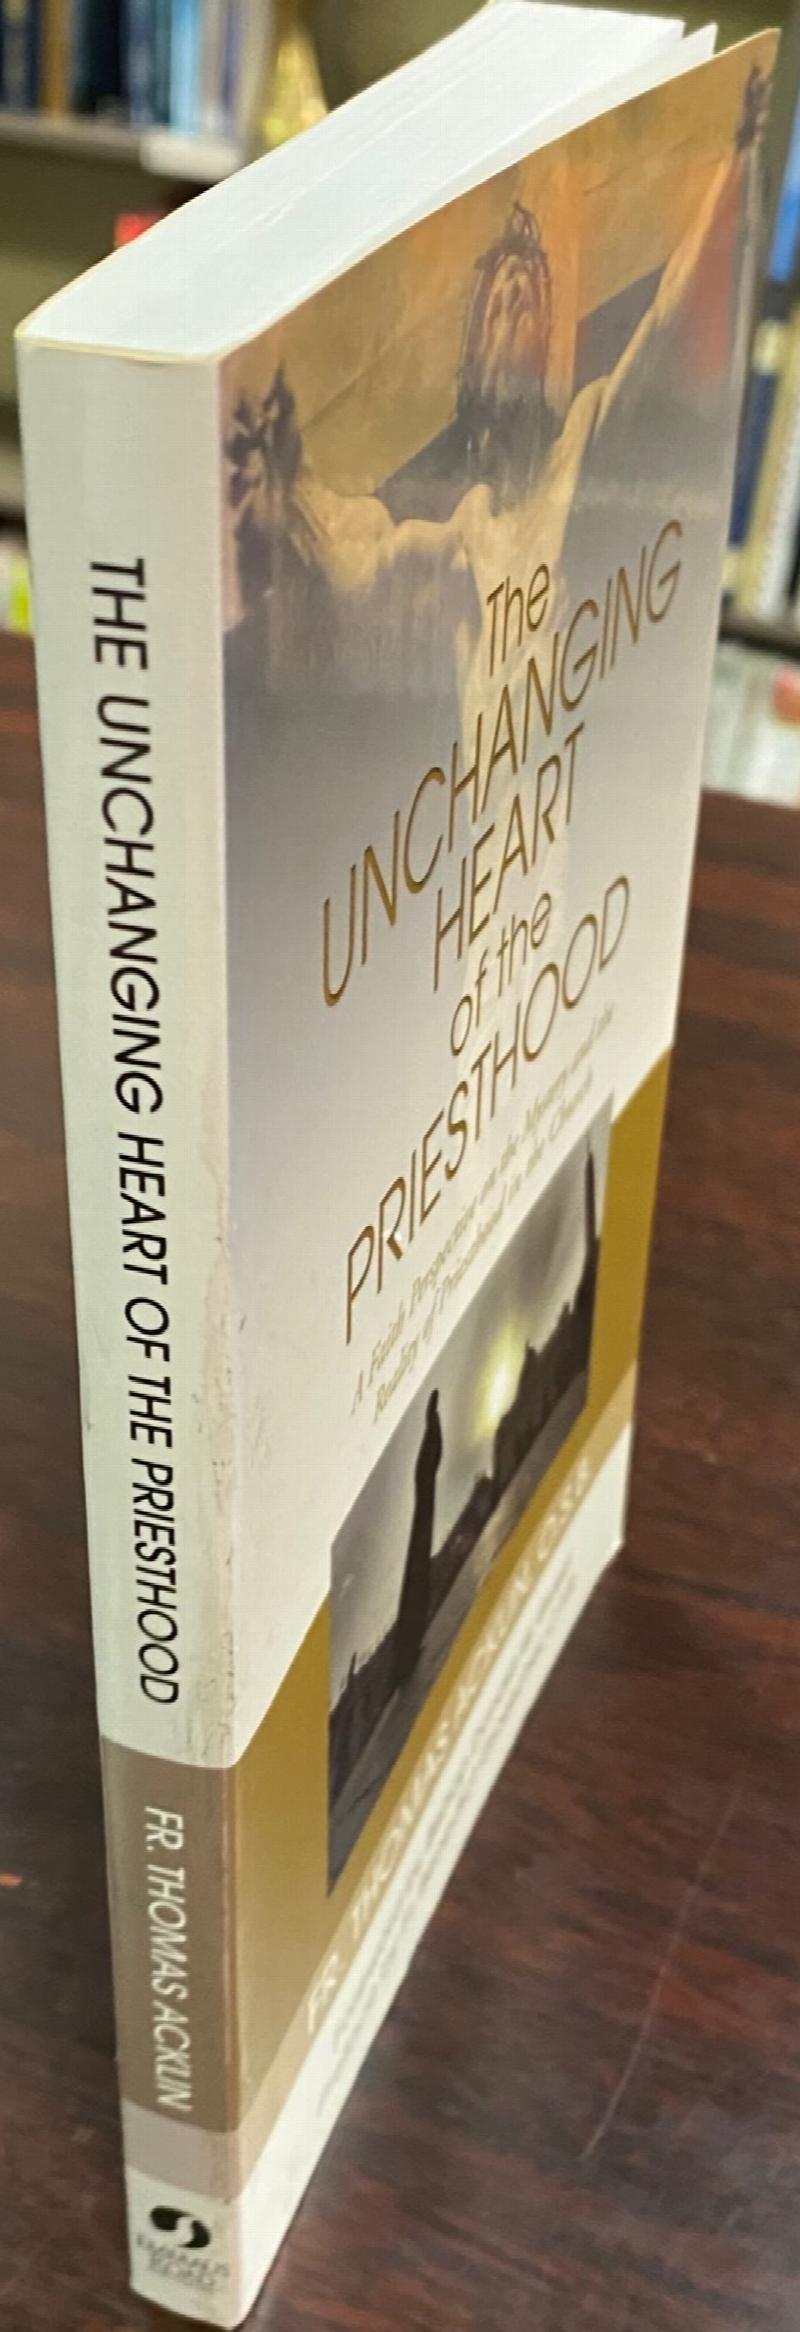 Image for Unchanging Heart of the Priesthood: A faith perspective on the mystery and the reality of priesthood in the church